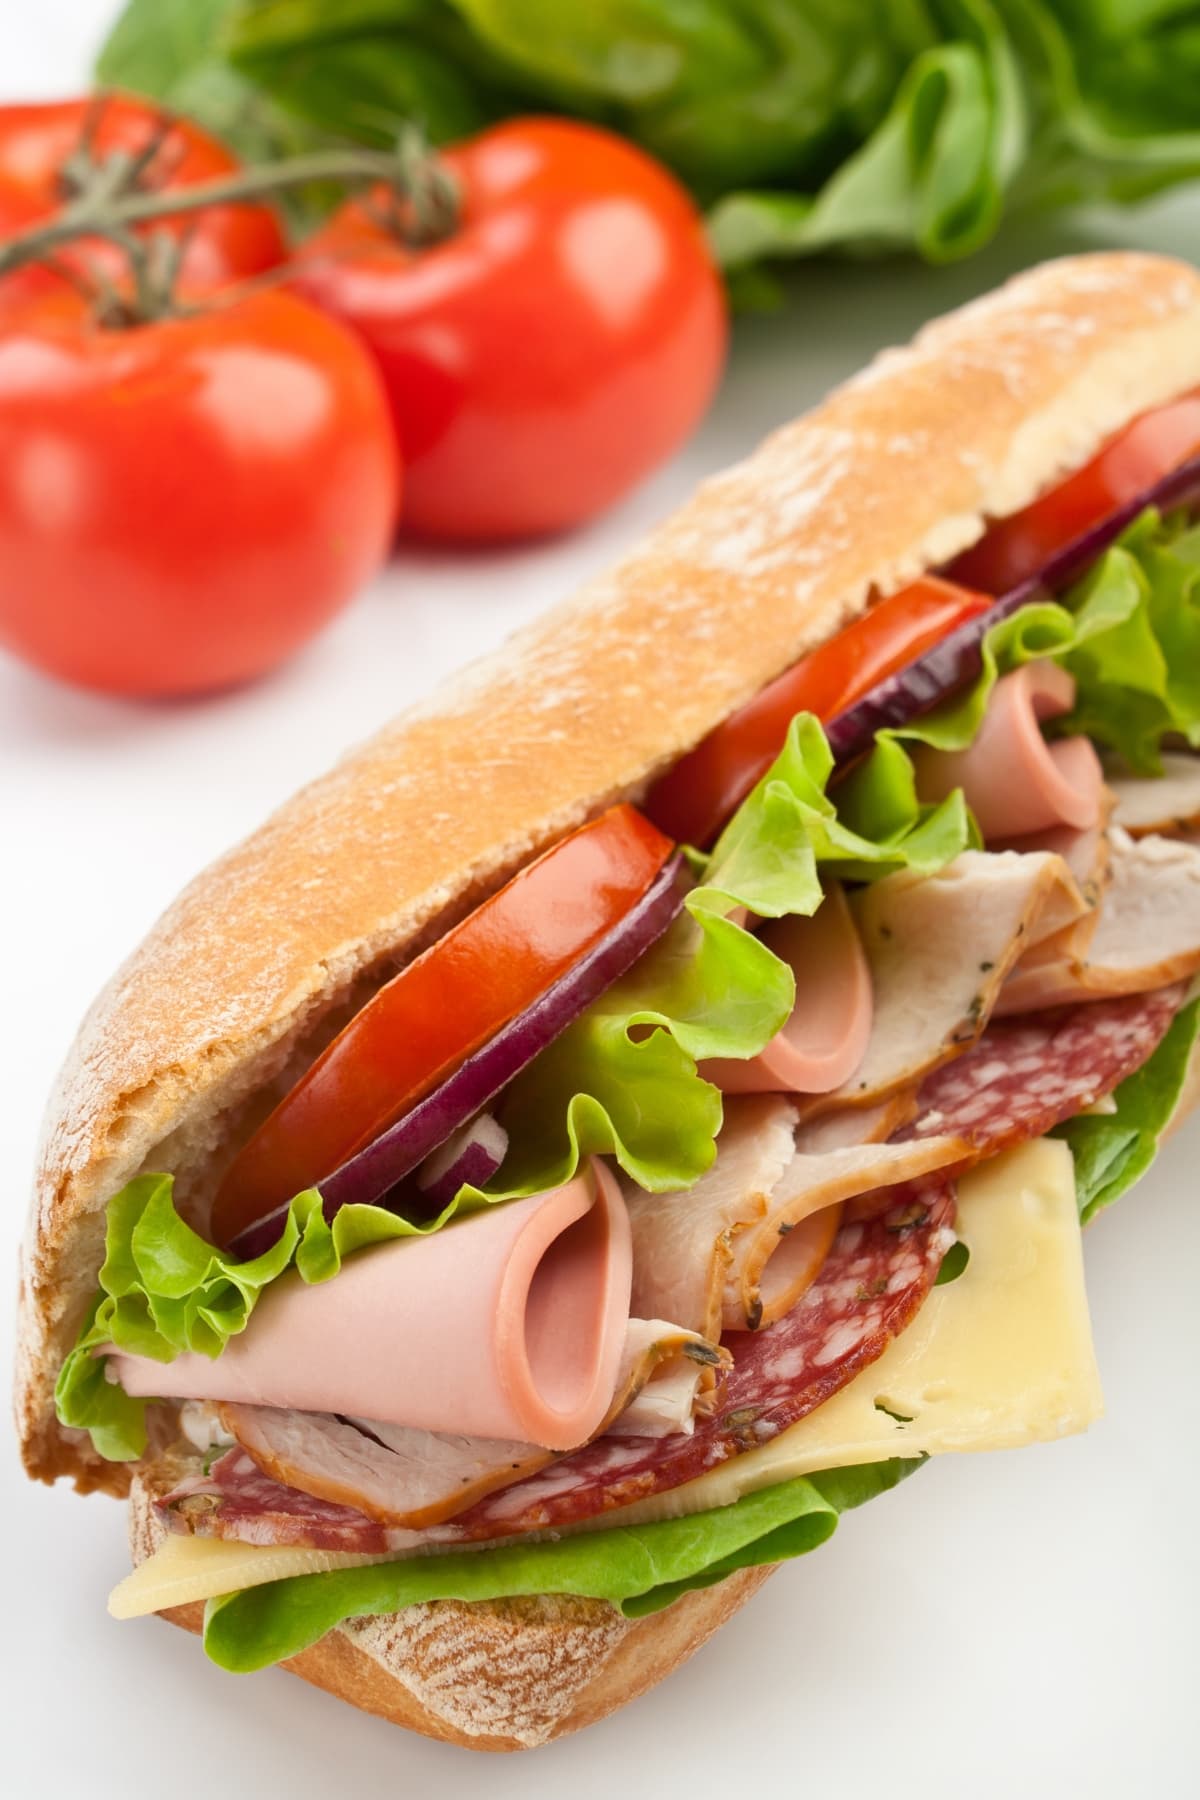 Subway baguette sandwich with lettuce, tomatoes, ham, turkey breast, salami and cheese.